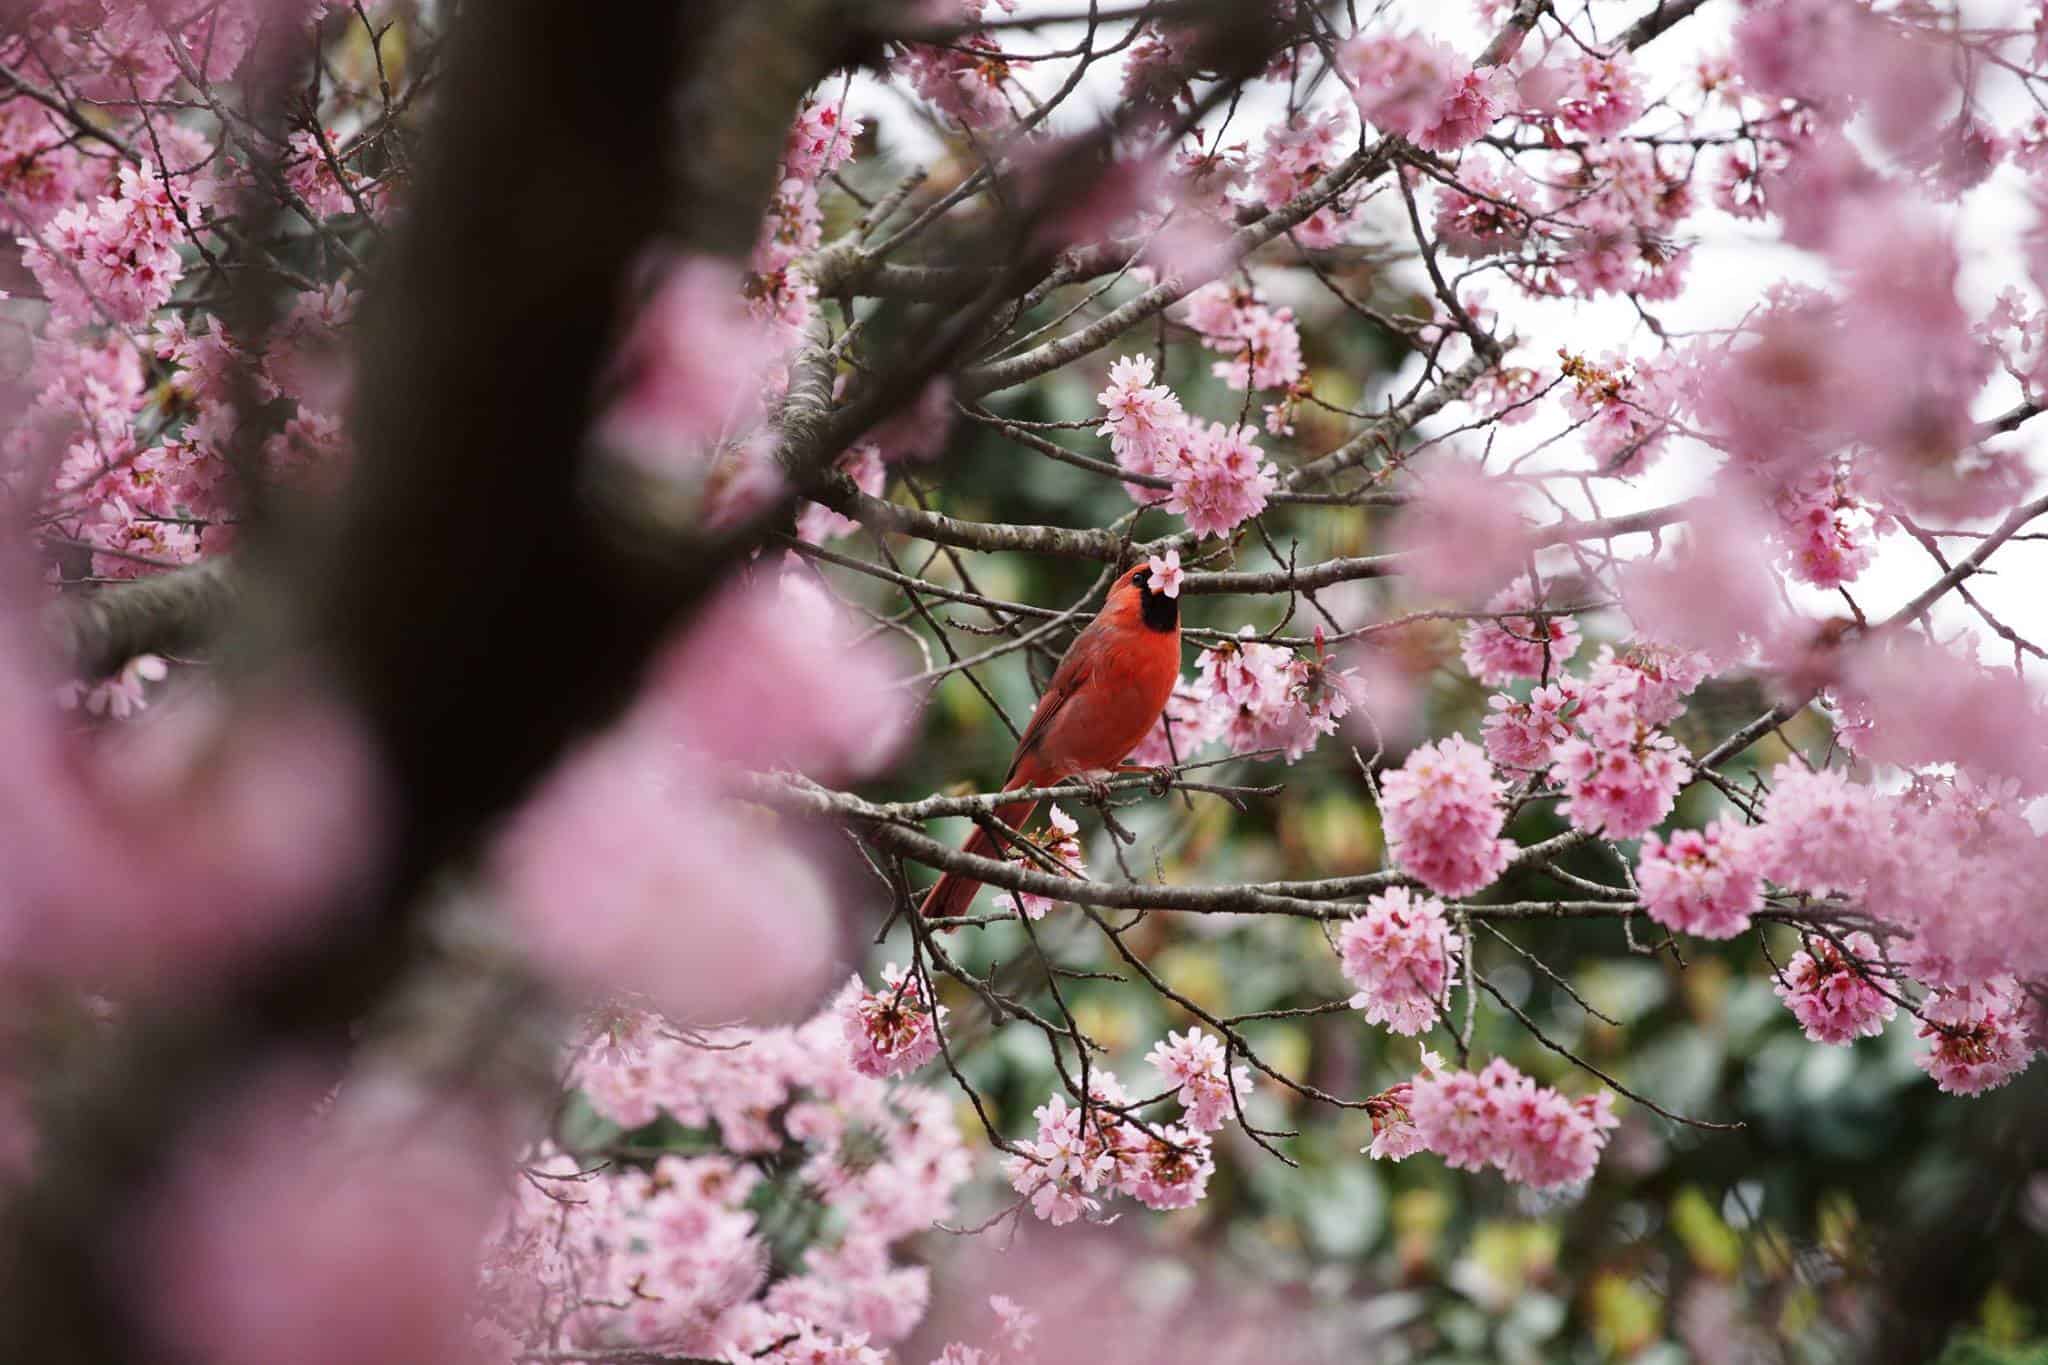 plants to attract northern cardinals include cherry trees